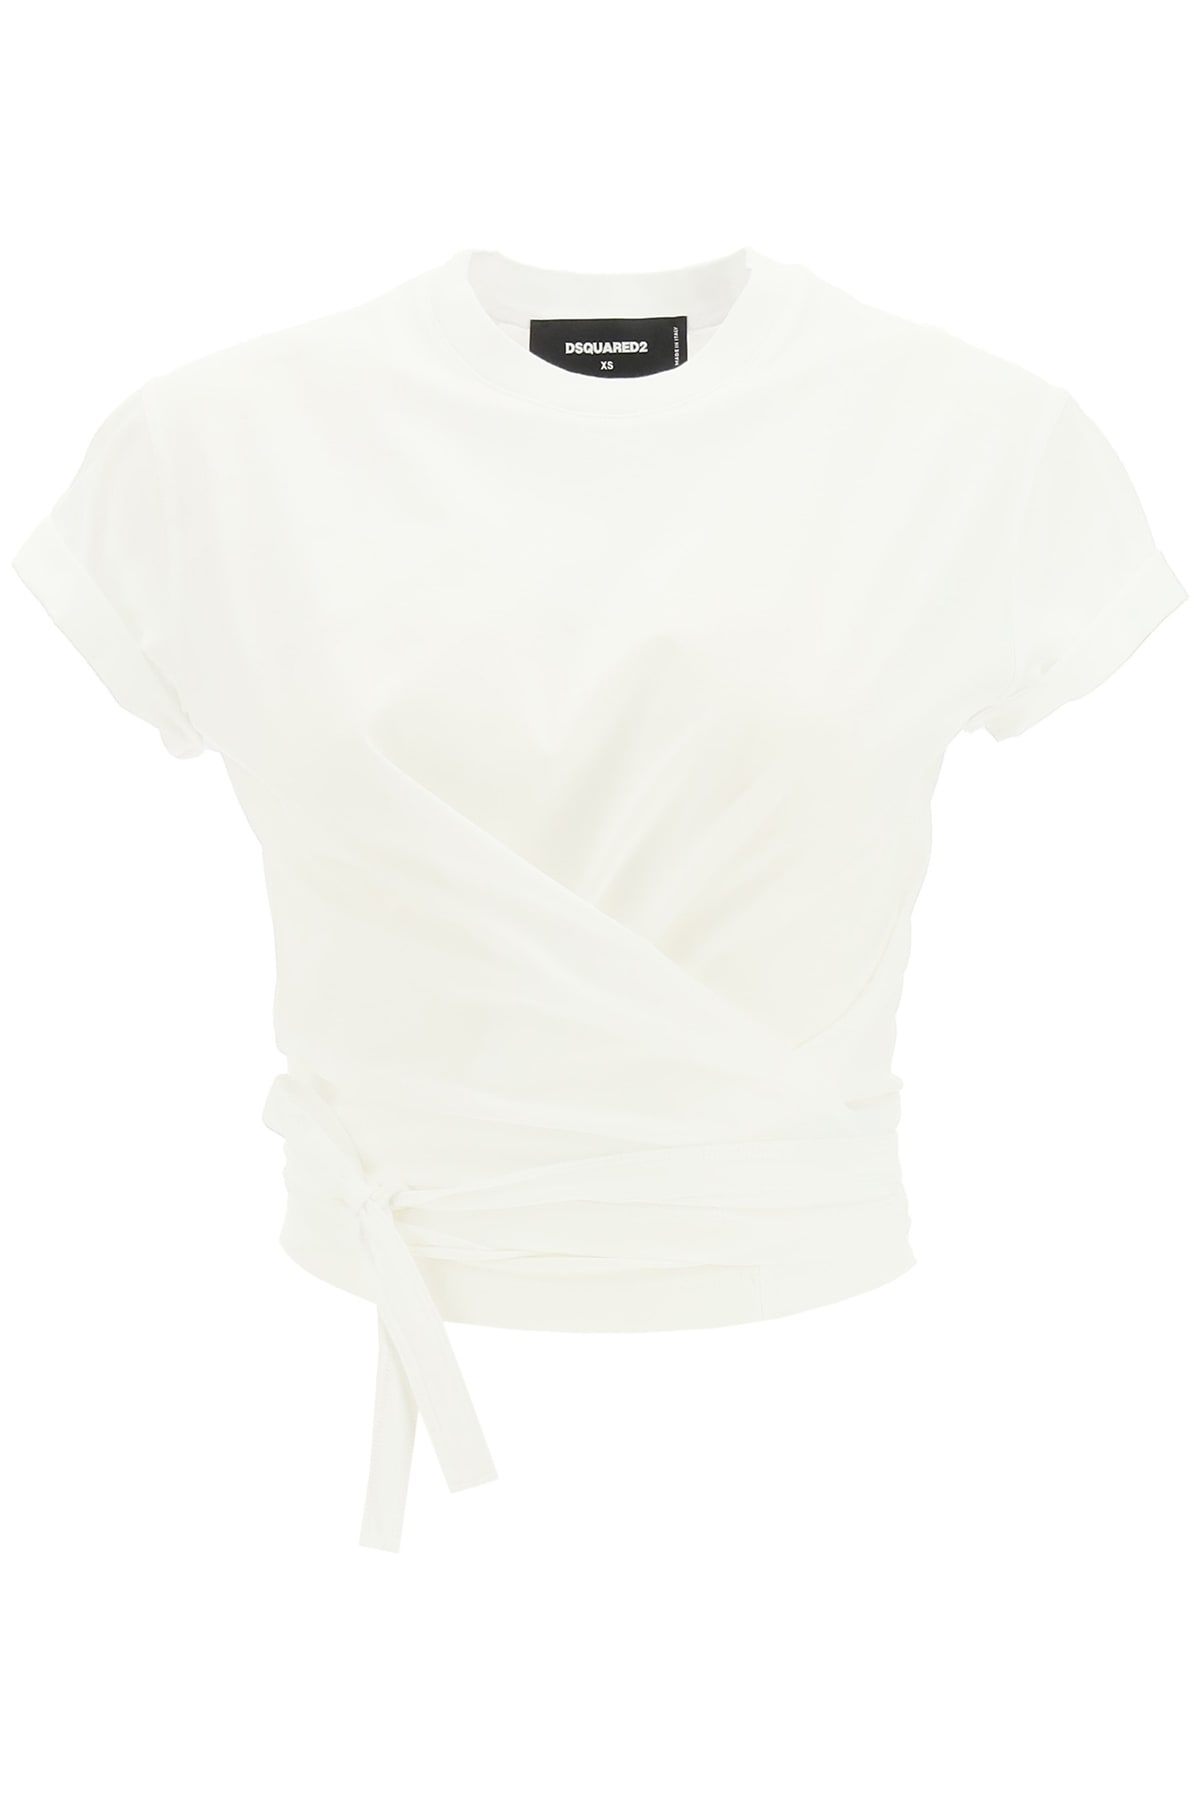 Dsquared2 Wrap-over T-shirt